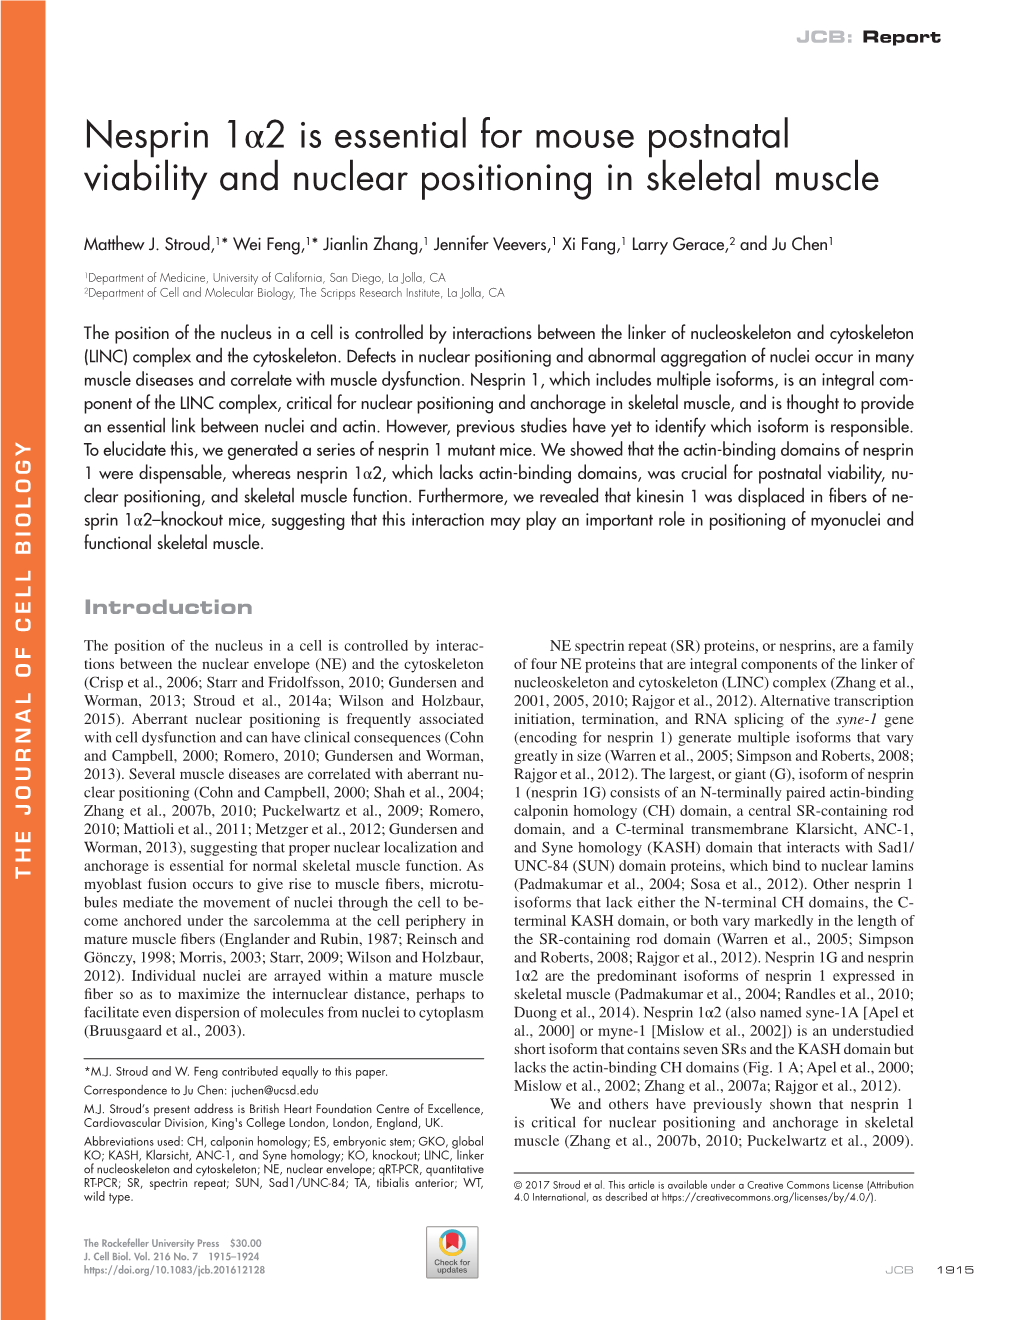 Nesprin 1Α2 Is Essential for Mouse Postnatal Viability and Nuclear Positioning in Skeletal Muscle